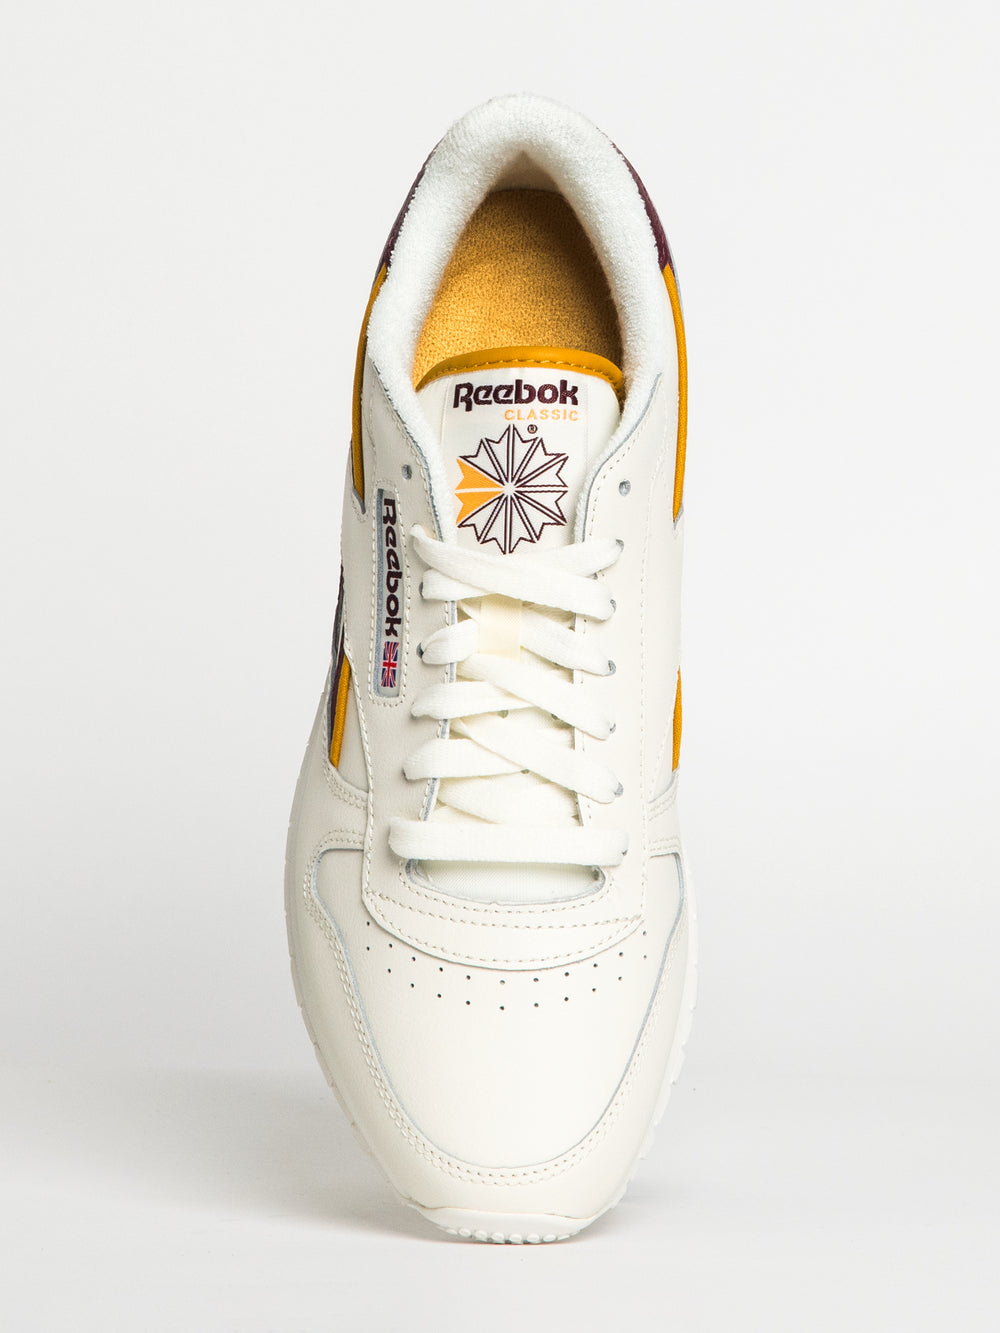 MENS REEBOK CLASSIC LEATHER Collective Boathouse SNEAKER | Footwear